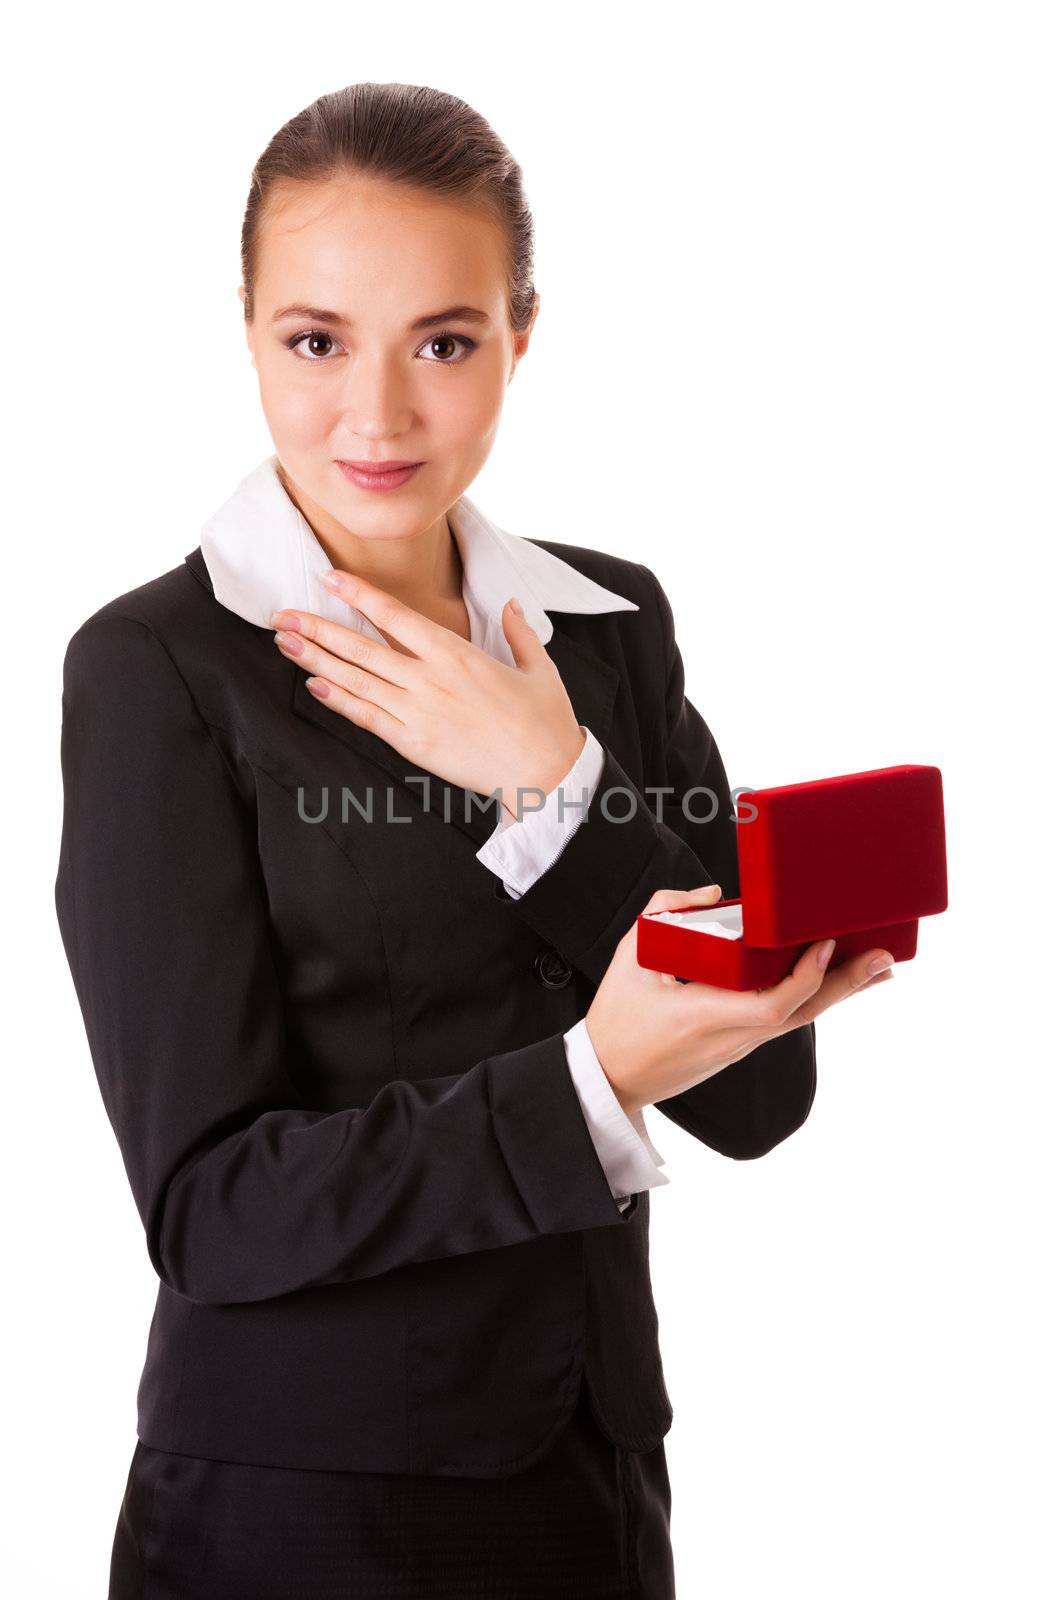 Admired business woman with open jewel box. Isolated on white background